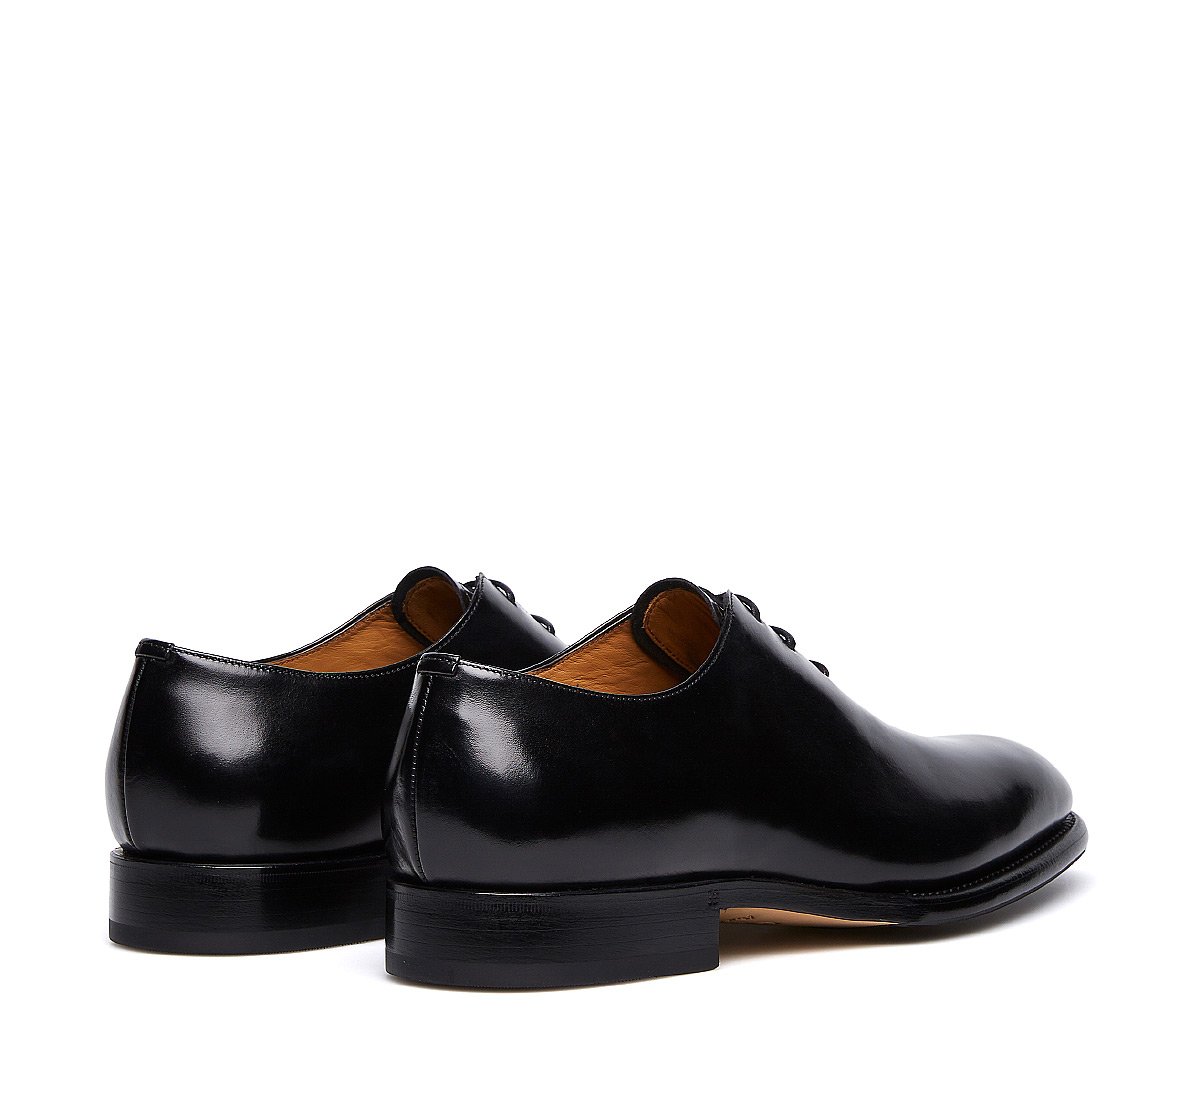 Three-eyelet lace-ups in soft calfskin with Flex Goodyear construction